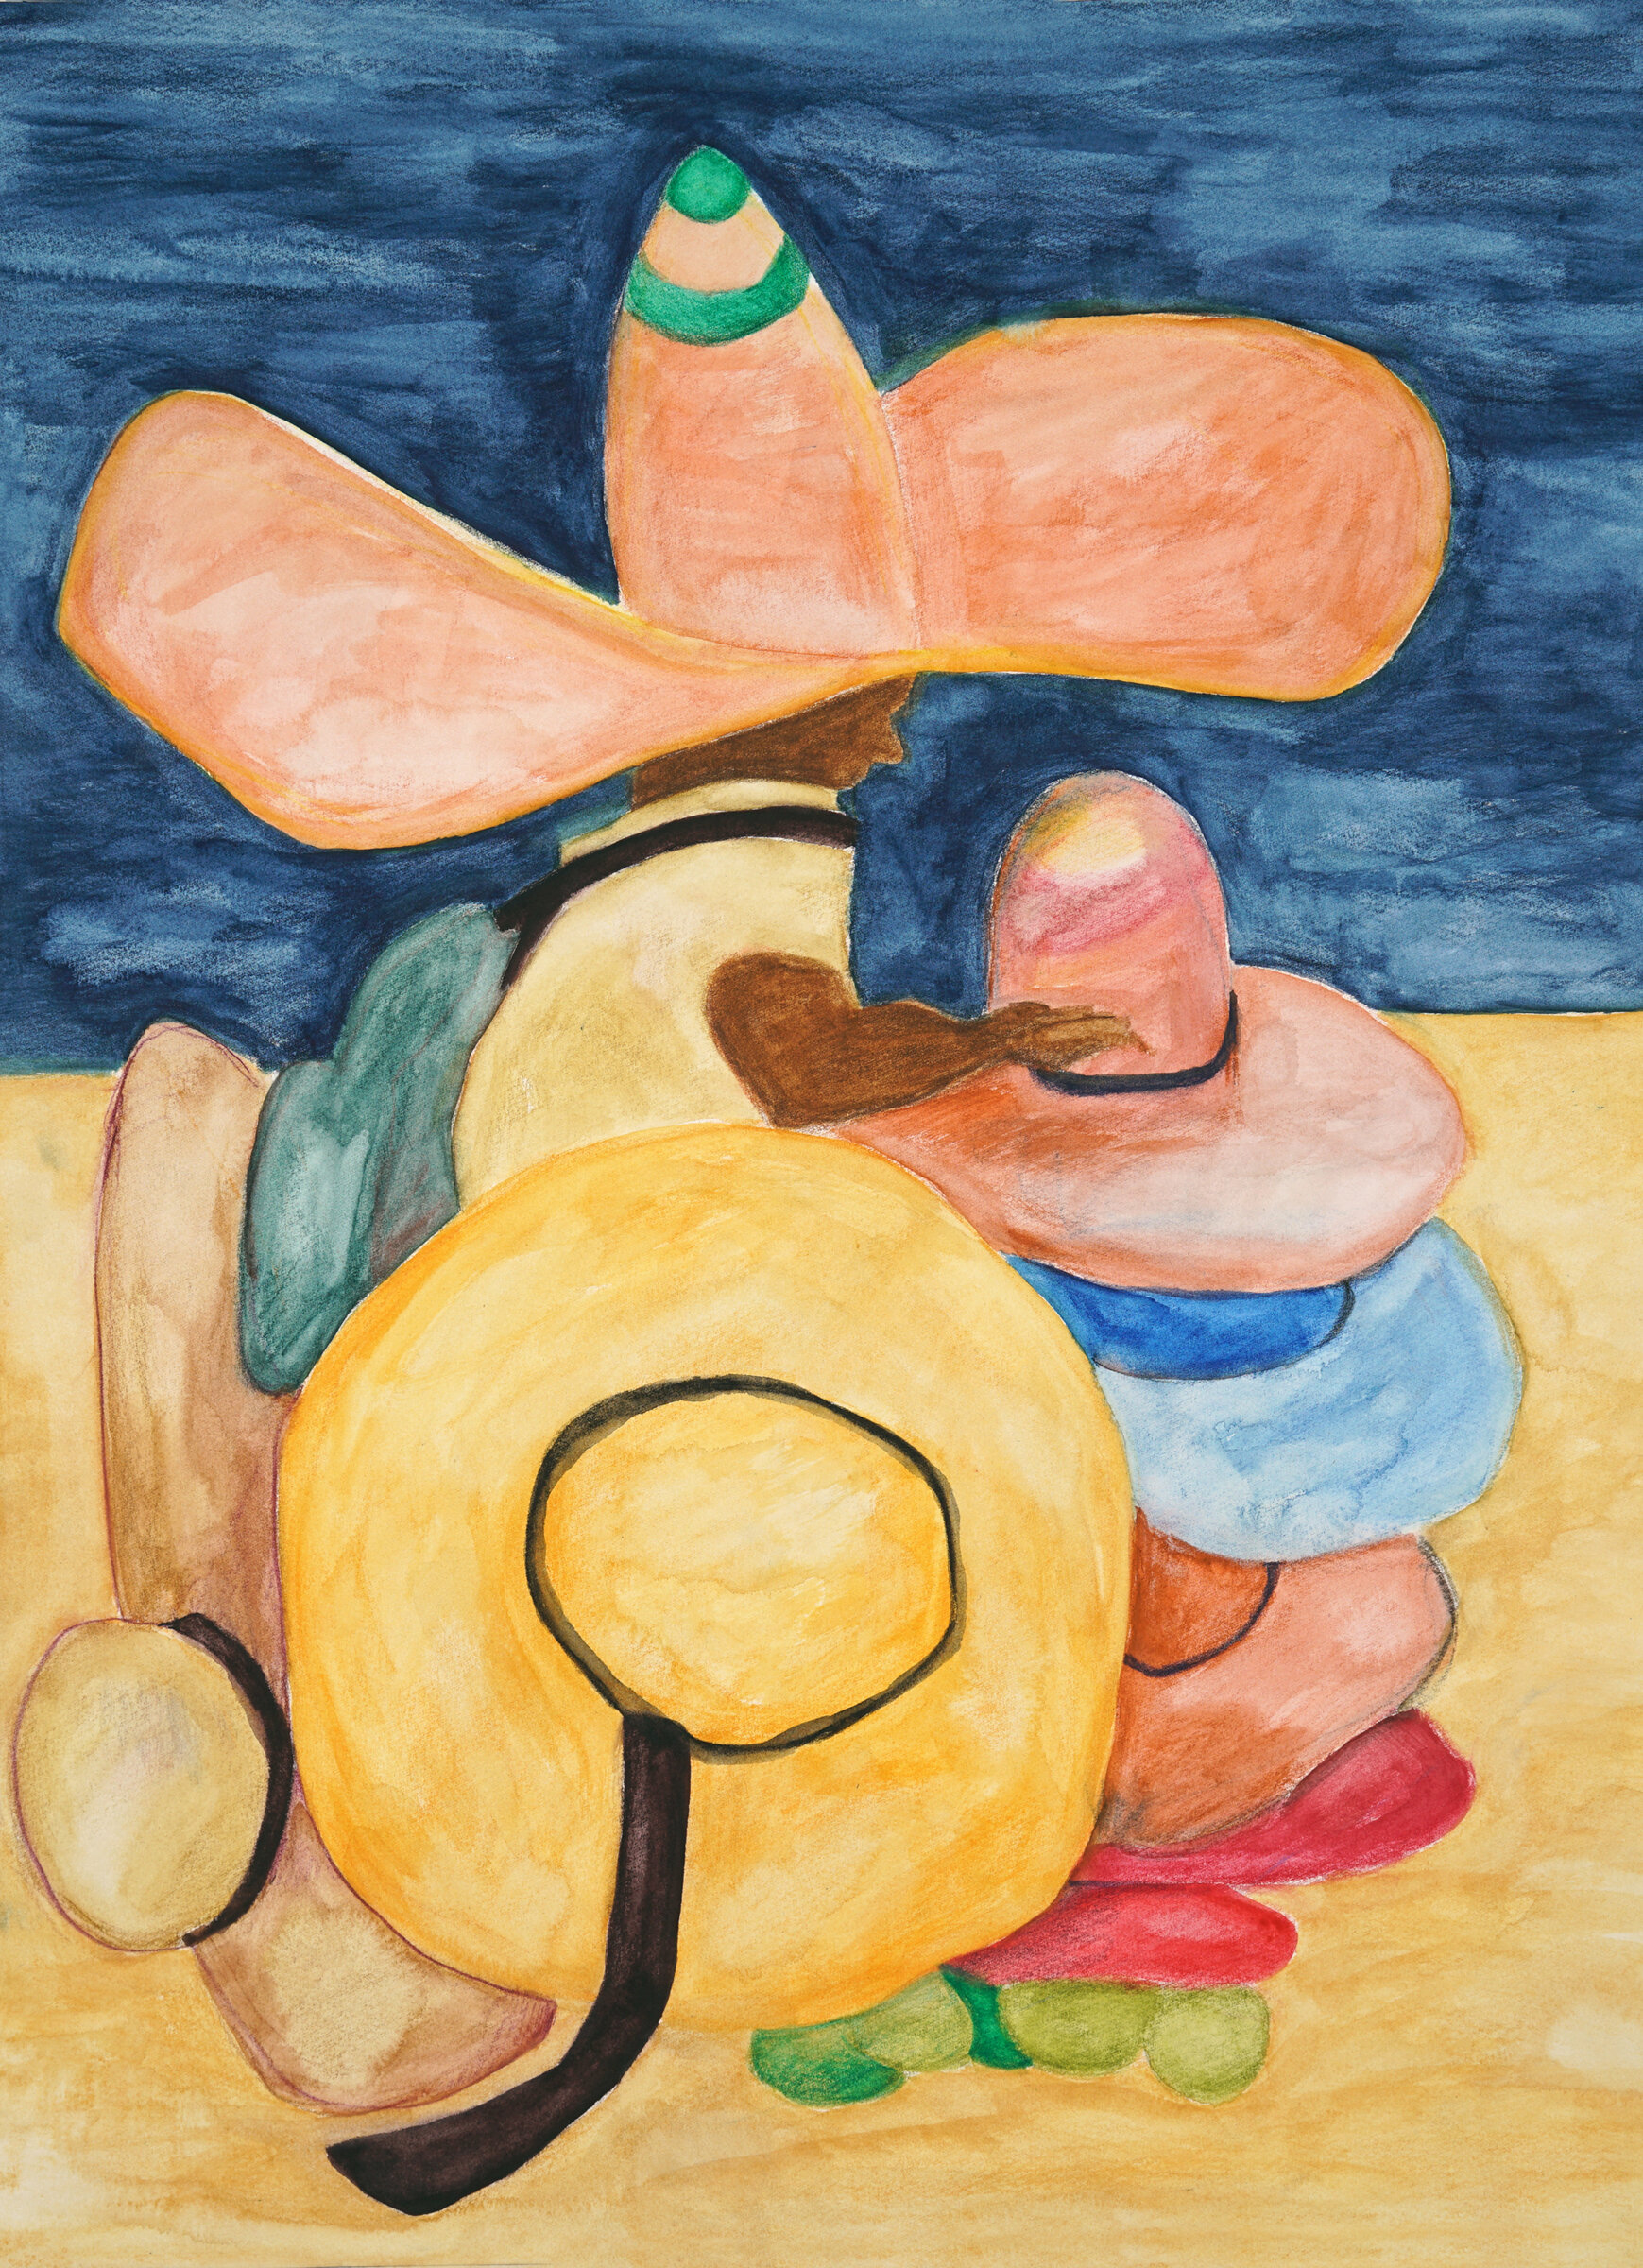  Hat Vendor,  2019, watercolor pencil and ink on paper 36 x 30 in. 